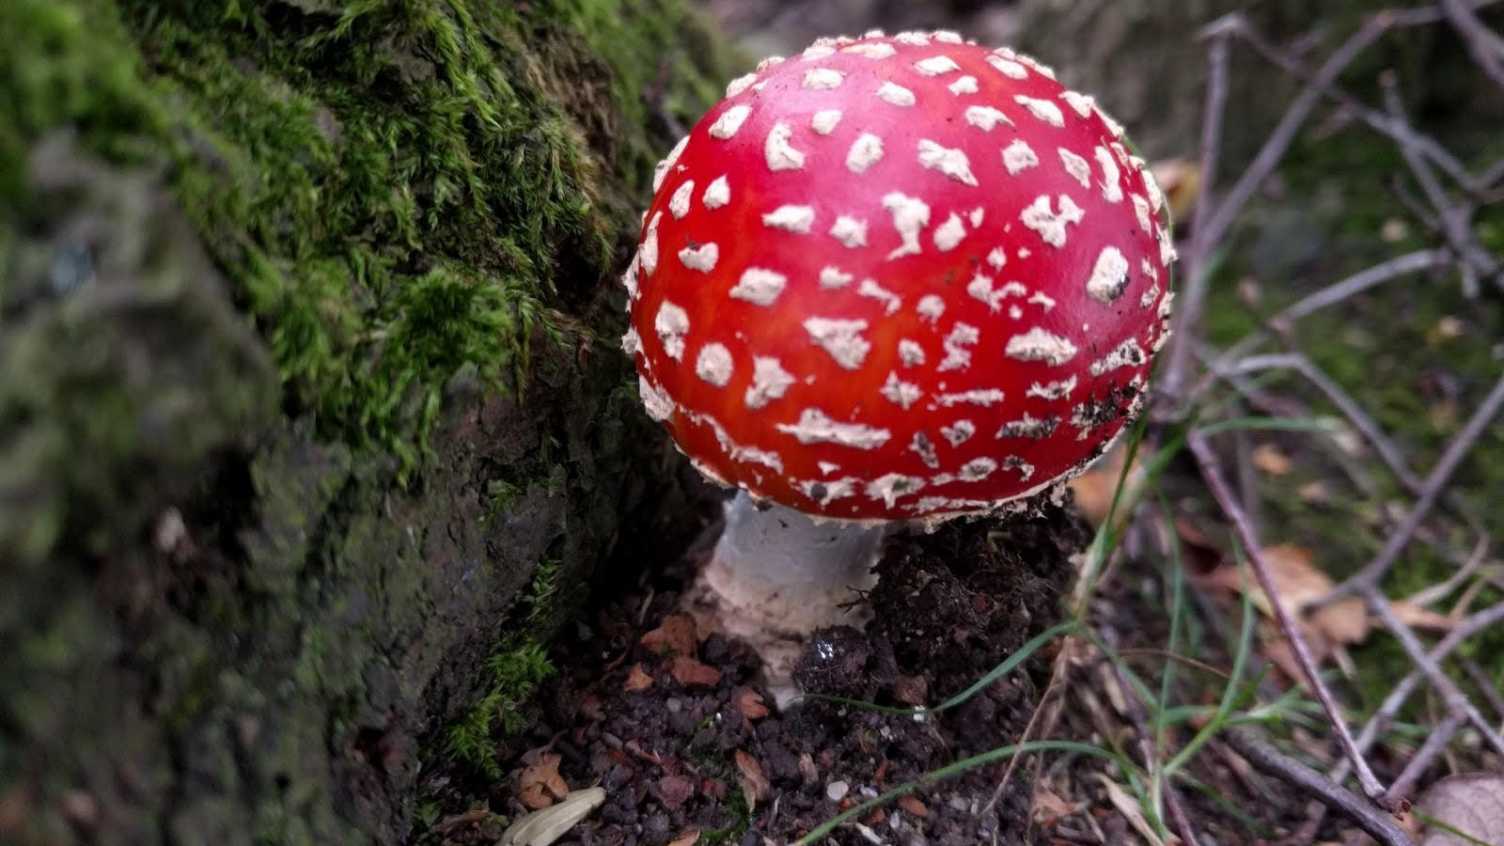 Fungi stores a third of carbon from fossil fuel emissions and could be essential to reaching net zero | News